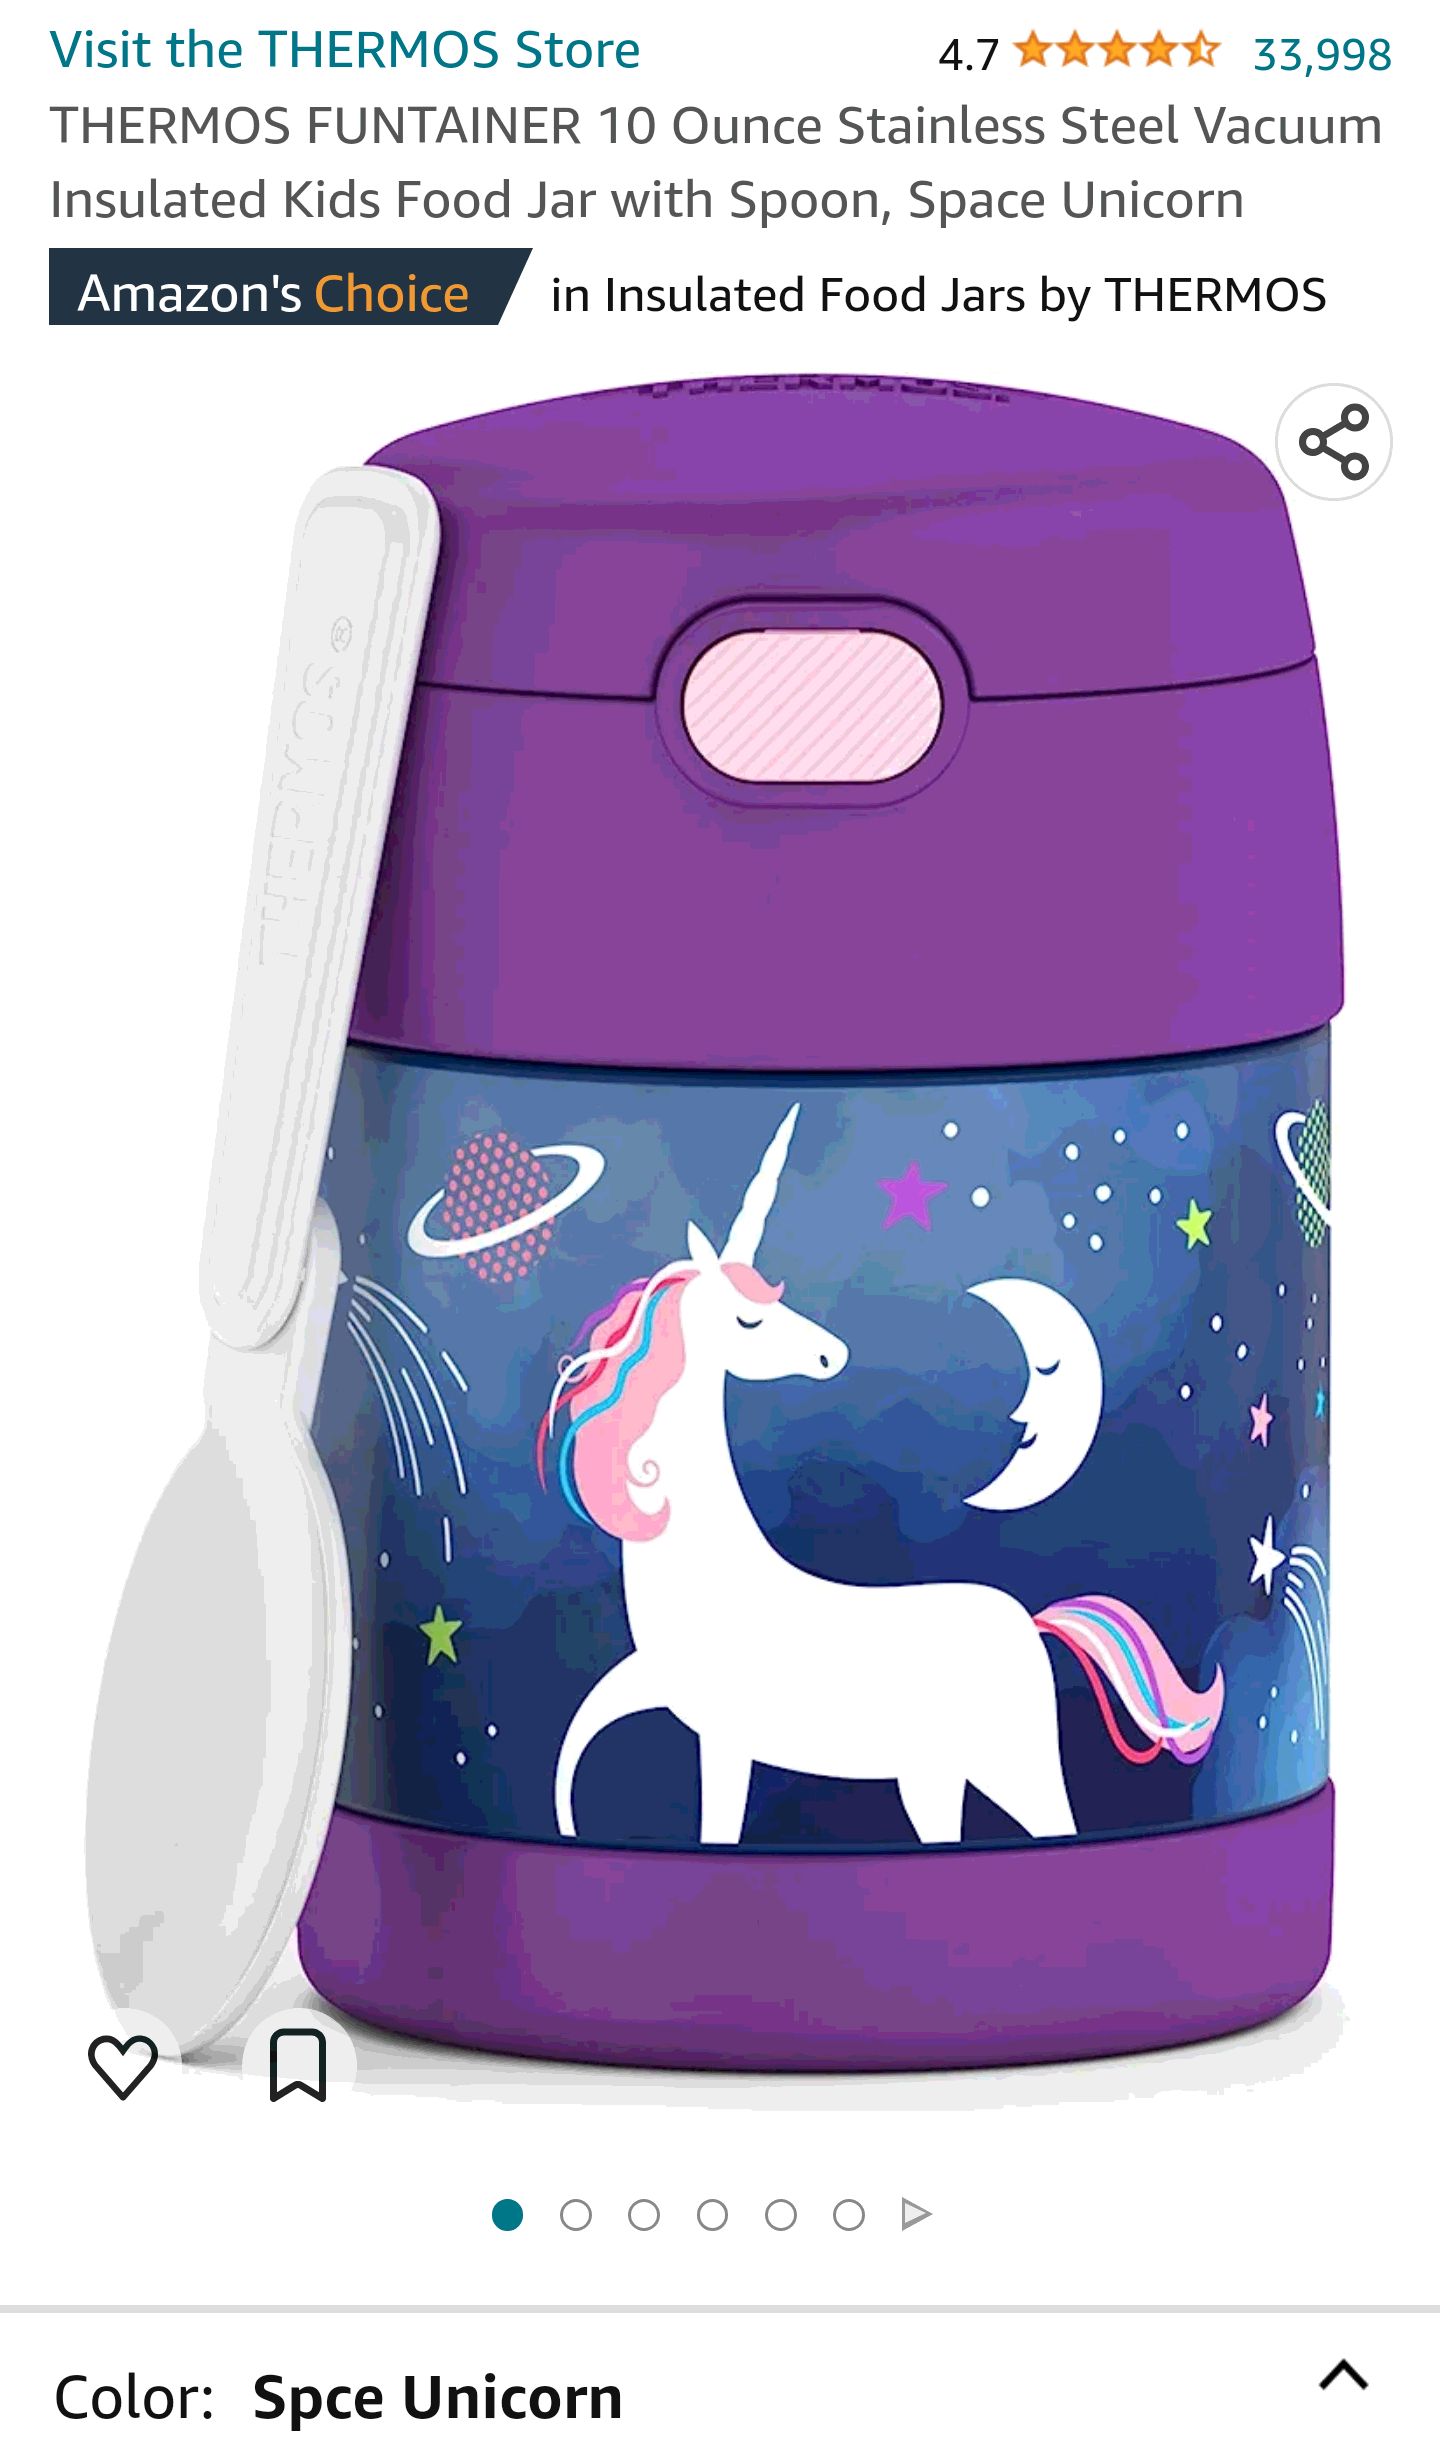 THERMOS FUNTAINER 10 Ounce Stainless Steel Vacuum Insulated Kids Food Jar with Spoon, Space Unicorn : Home & Kitchen